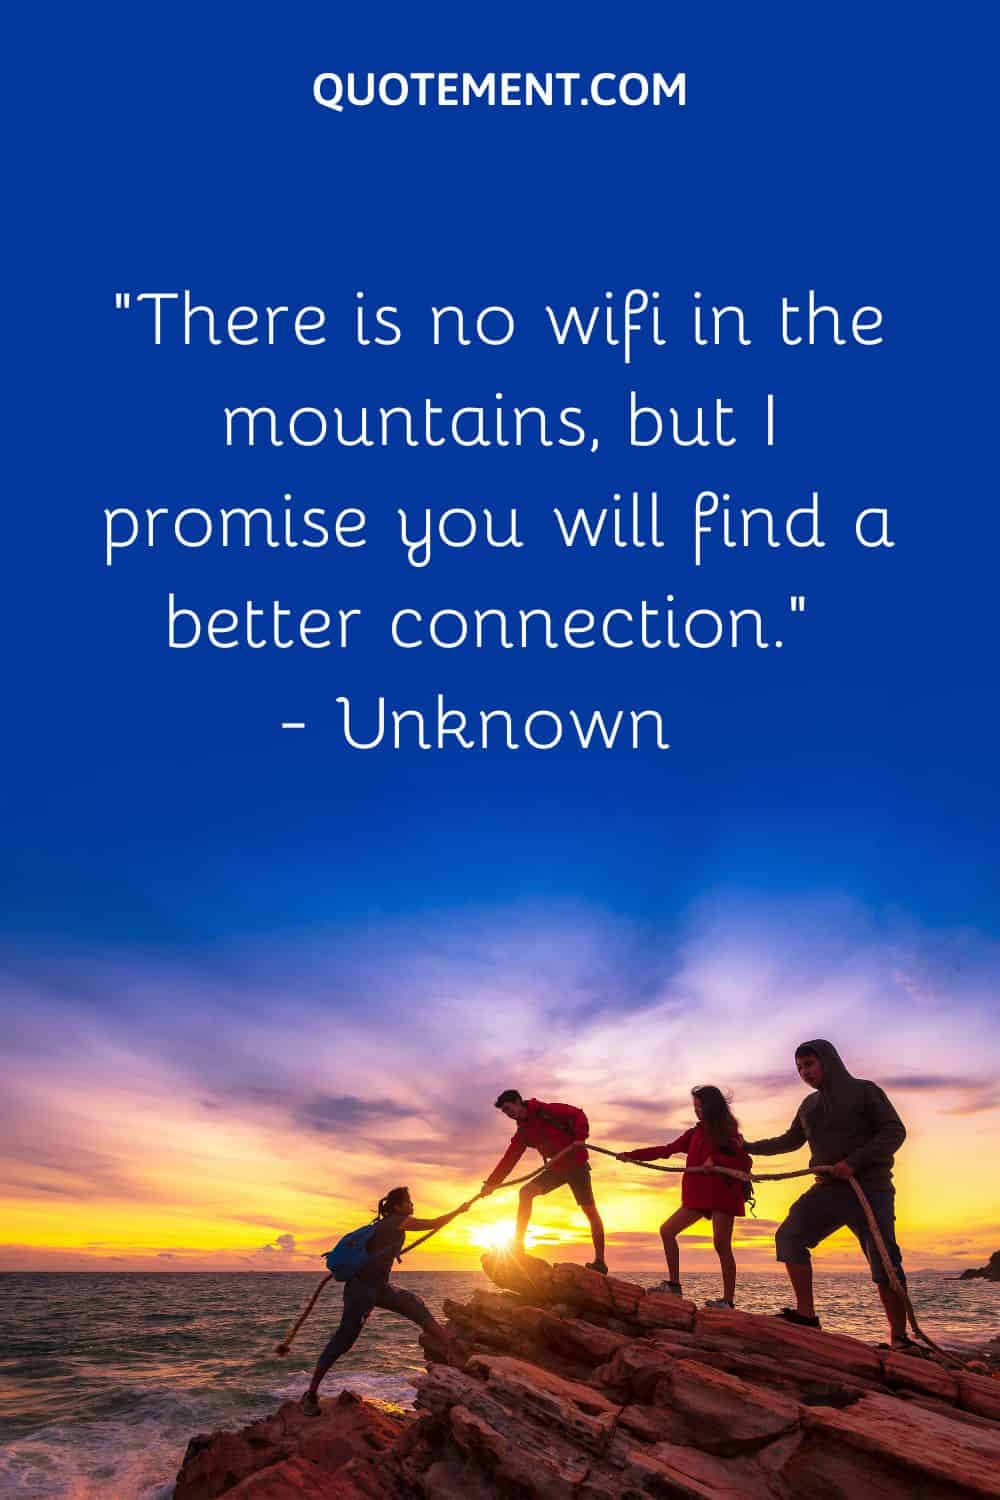 “There is no wifi in the mountains, but I promise you will find a better connection.” — Unknown